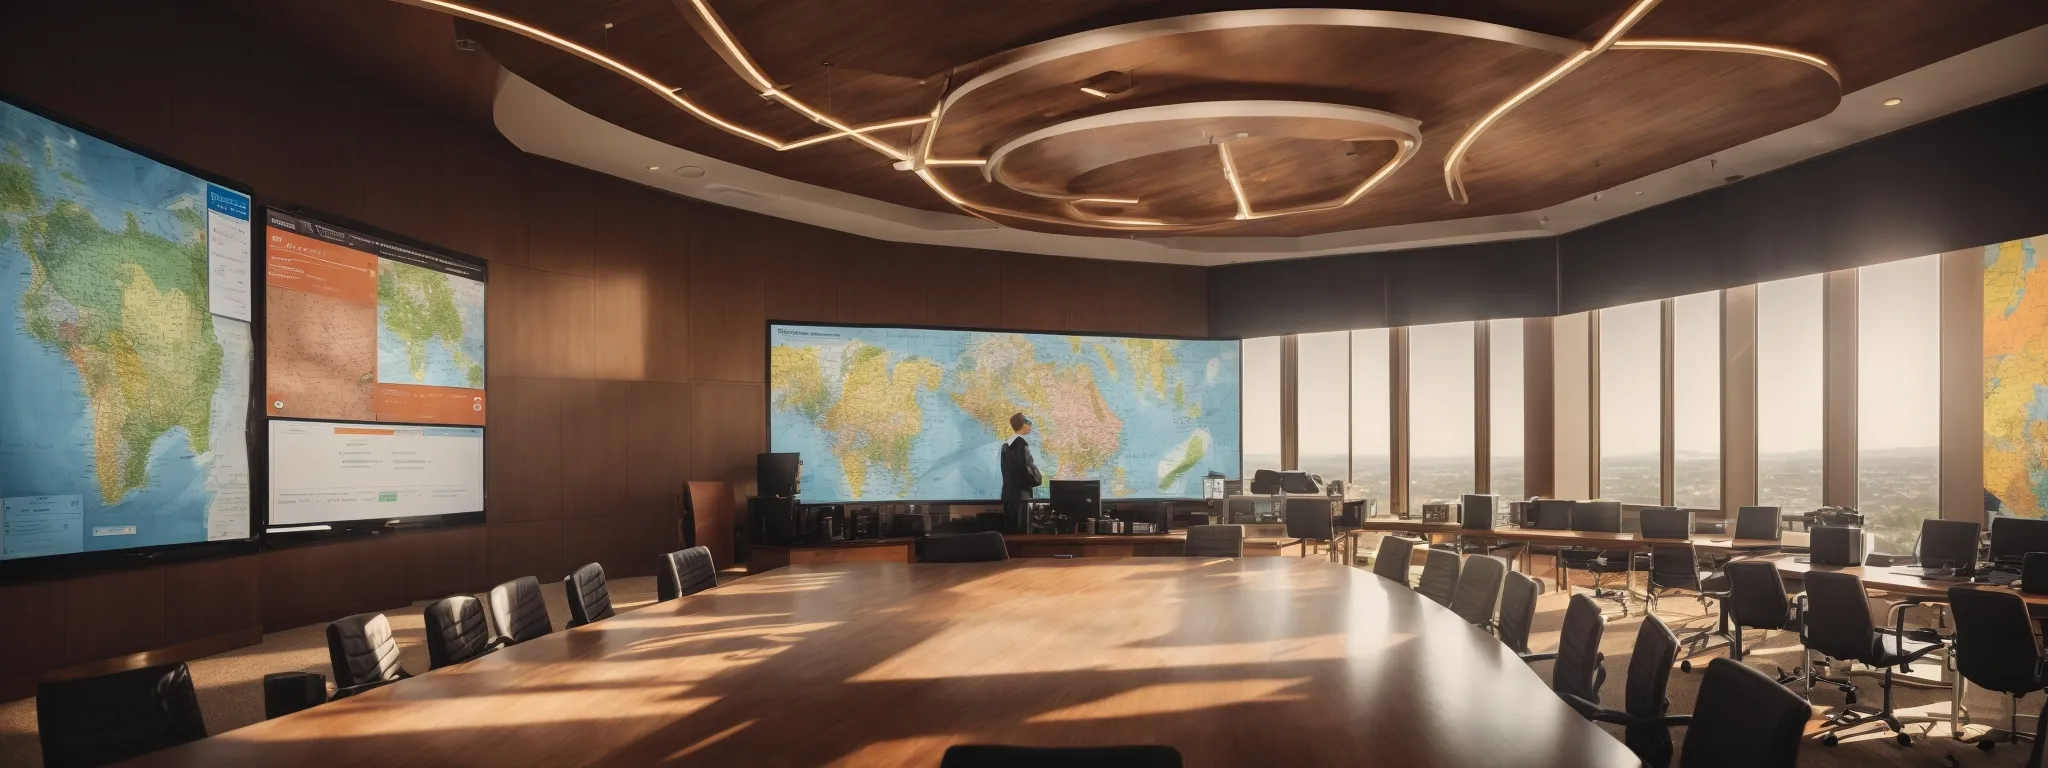 a warmly lit conference room with a large screen displaying a colorful map of local business rankings and search trends.